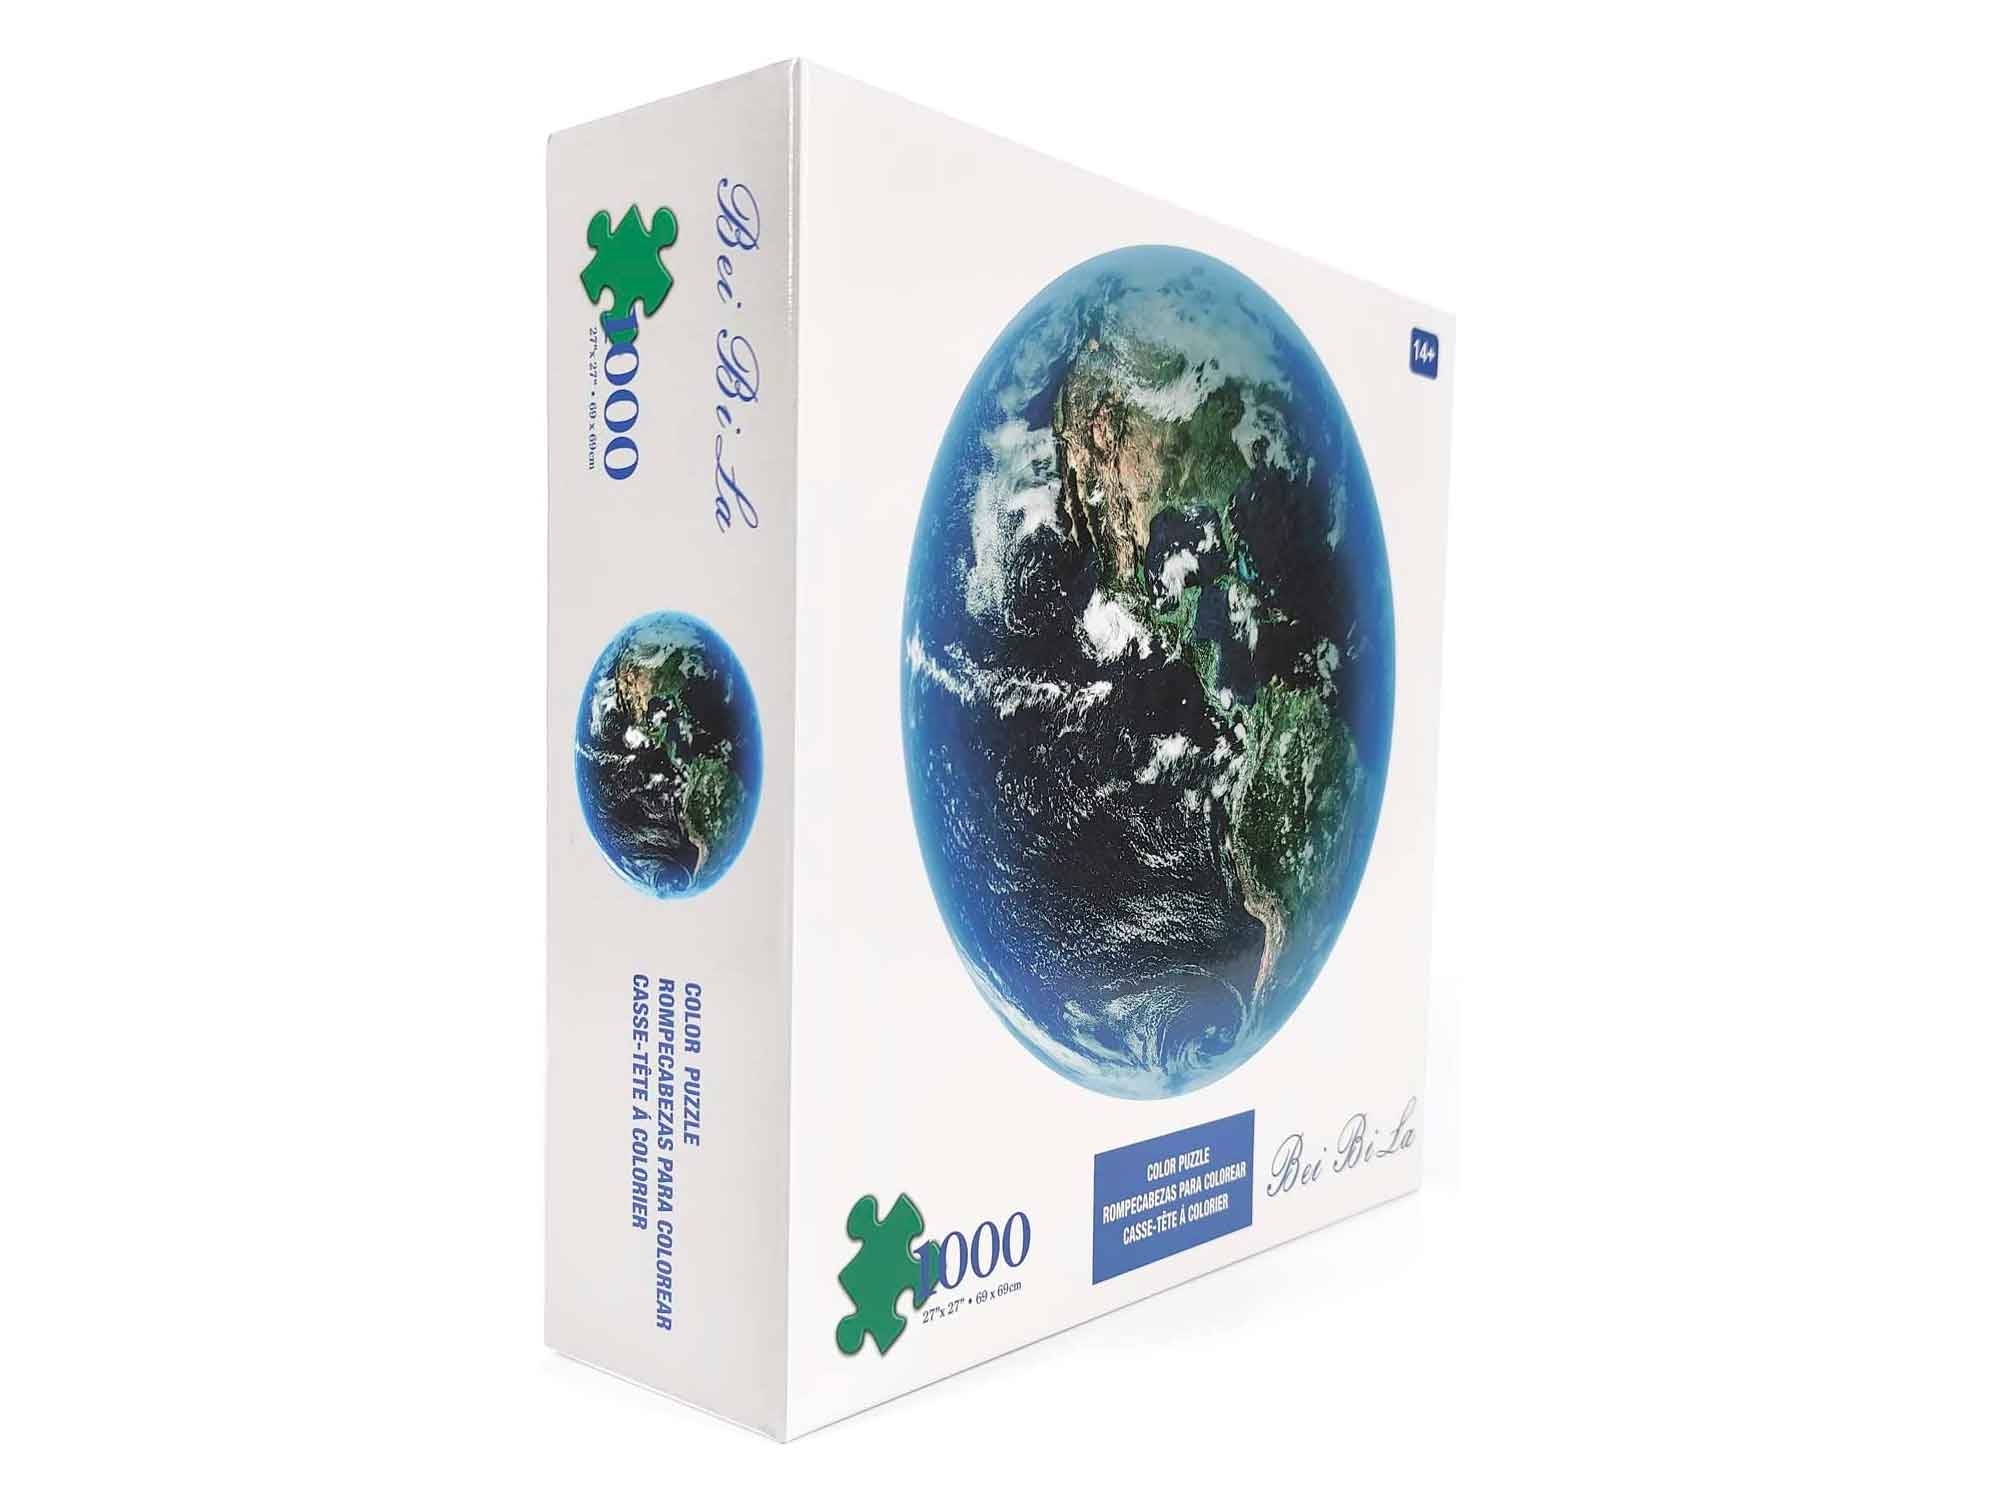 Hardcraft Jigsaw Puzzle 1000 Piece for Adults Earth Puzzle 3D Visual Puzzle Jigsaw Puzzle